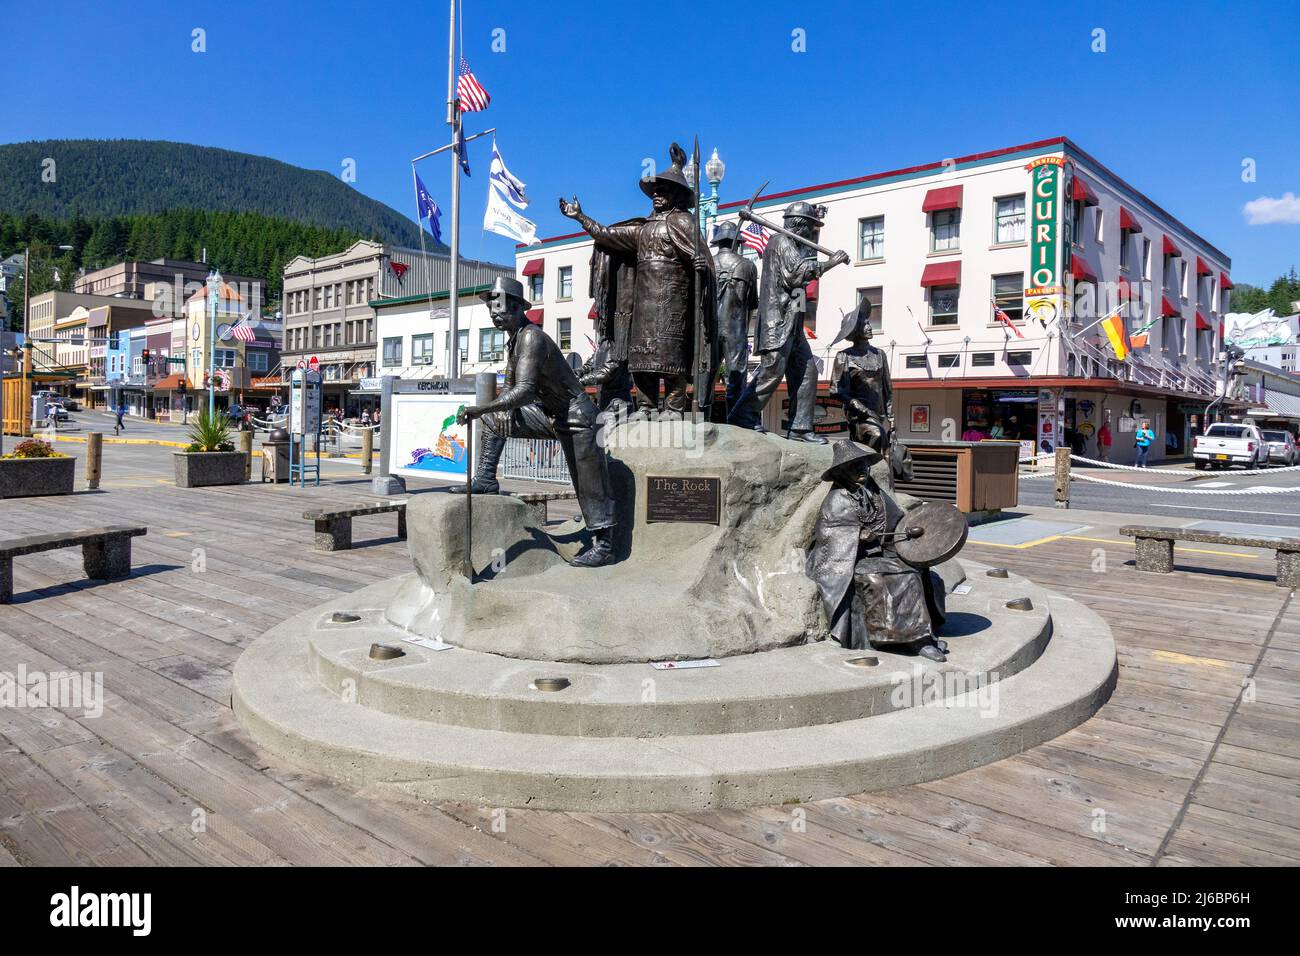 The Rock Bronze Statue In Ketchikan Alaska, Depicting The History Of People In The Early Years Of Ketchikan Alaska Stock Photo